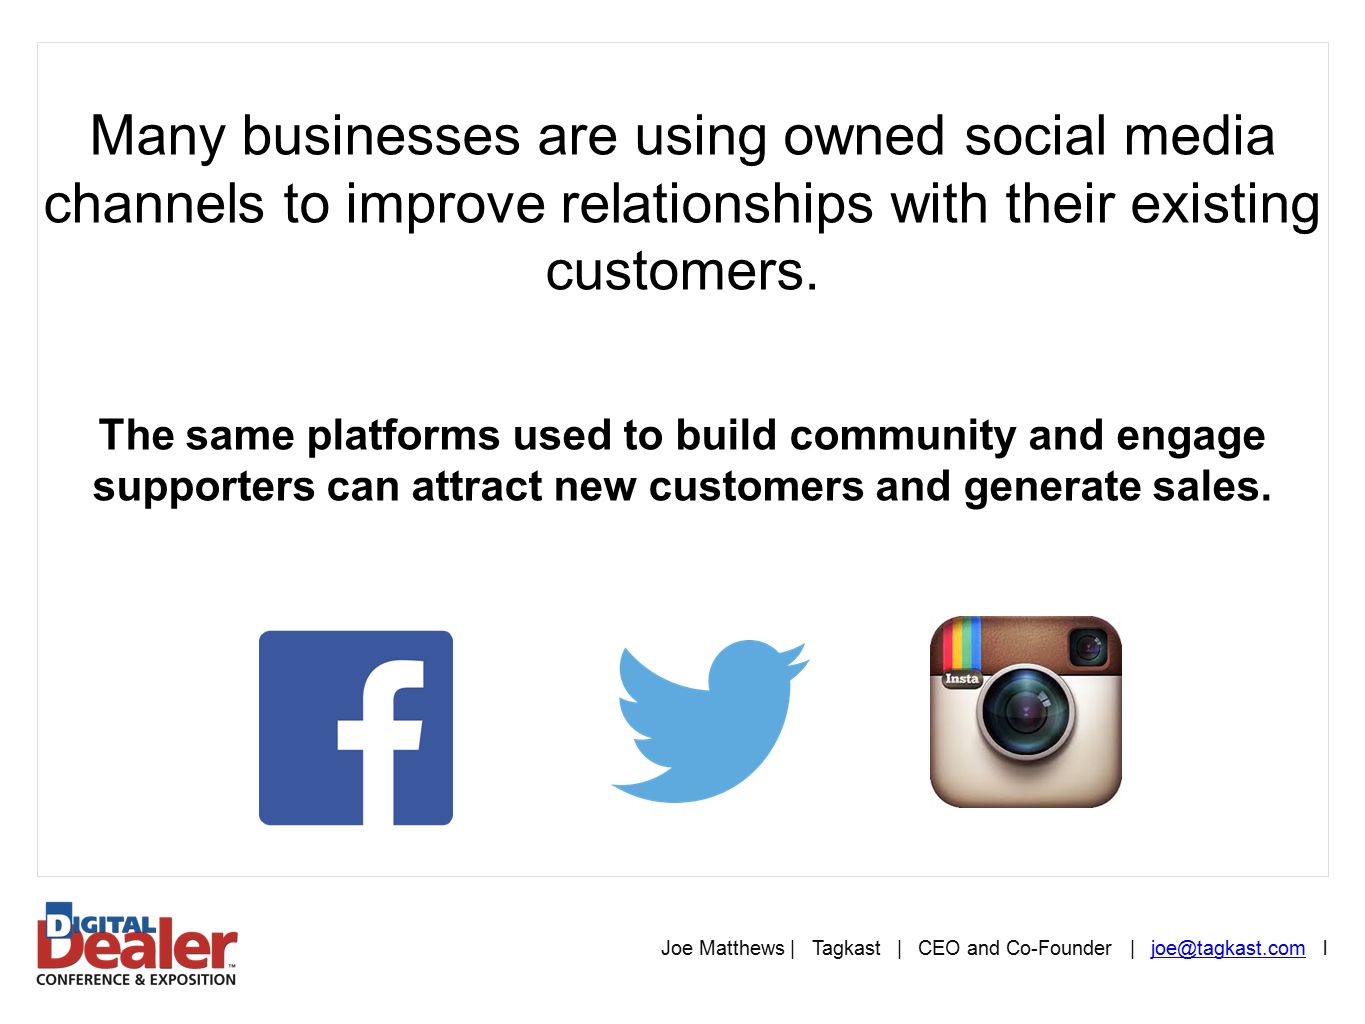 Many businesses are using owned social media channels to improve relationships with their existing customers.